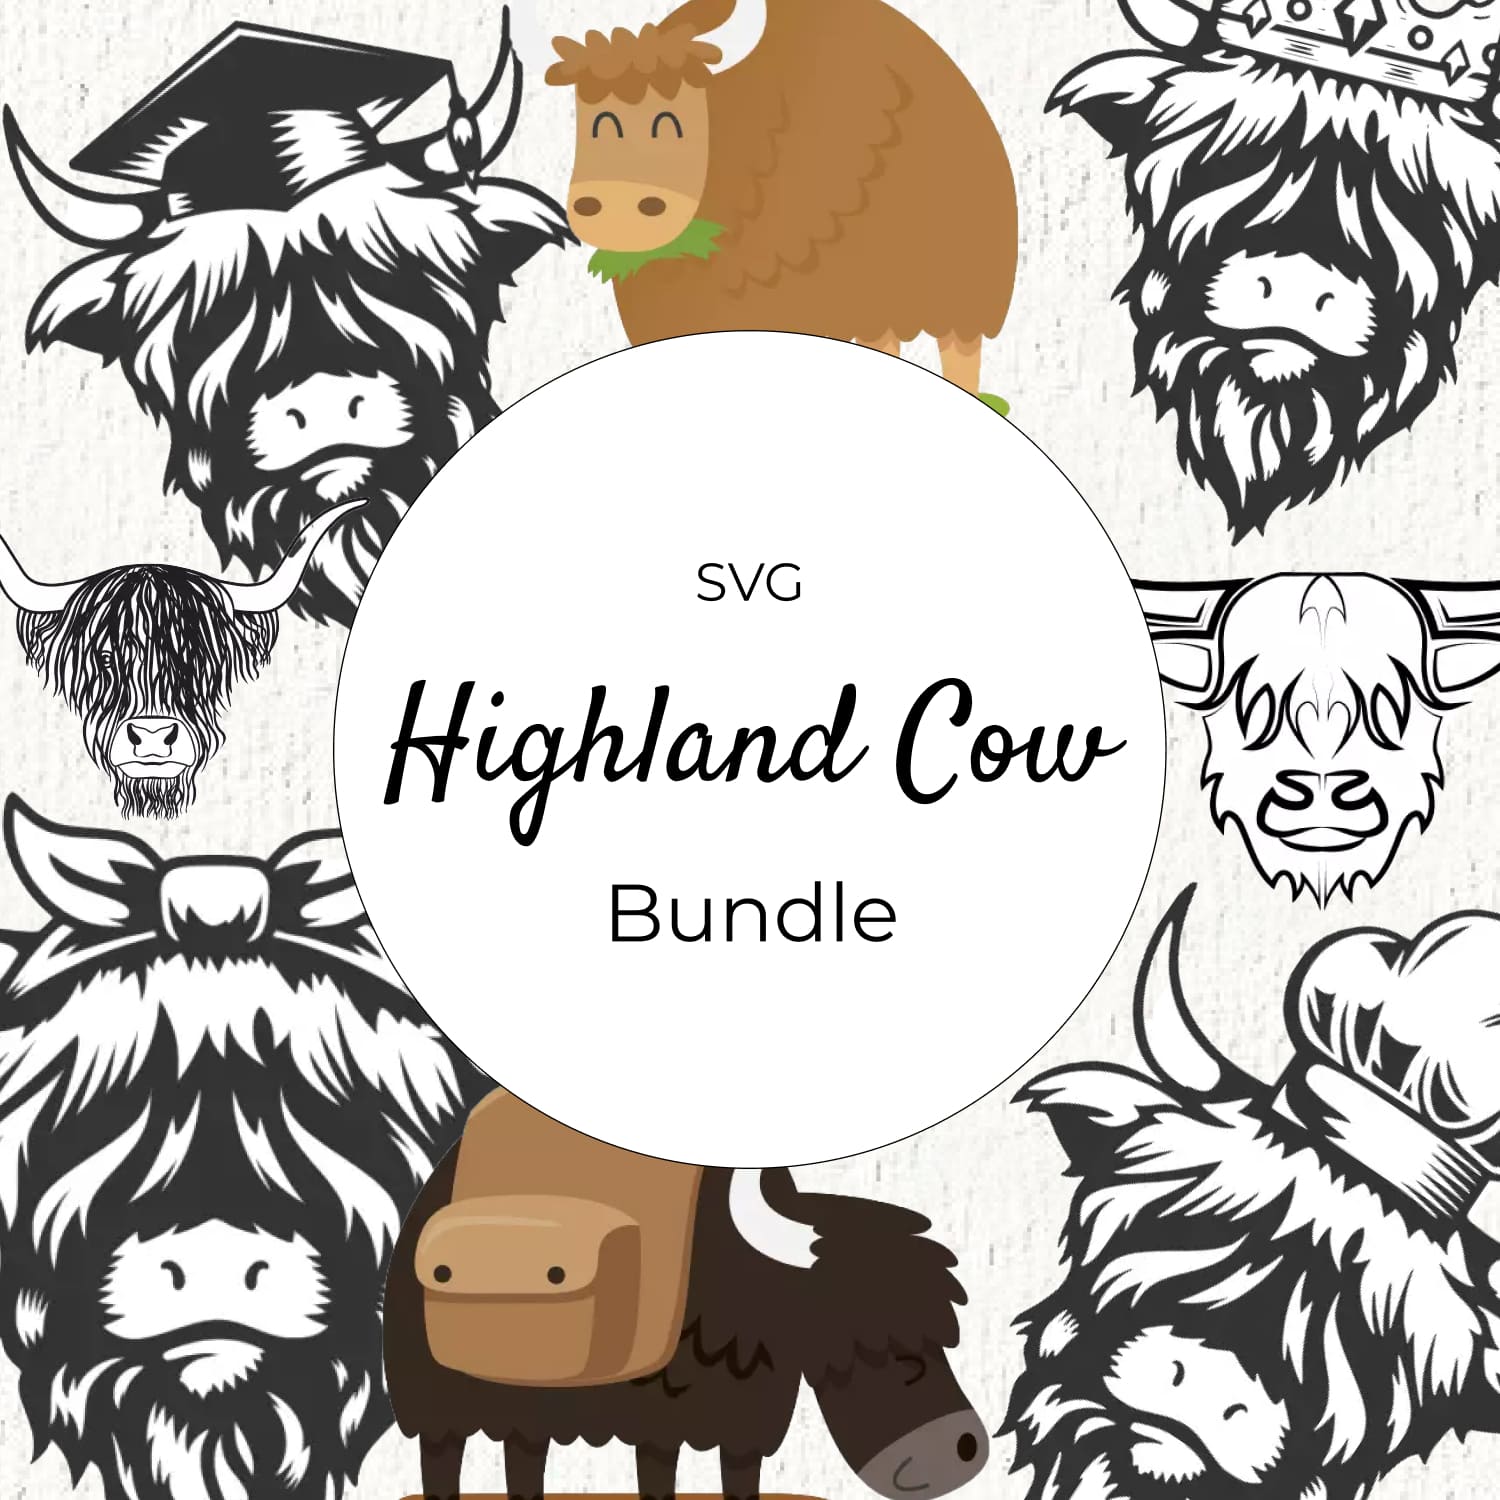 The highland cow bundle is shown in black and white.